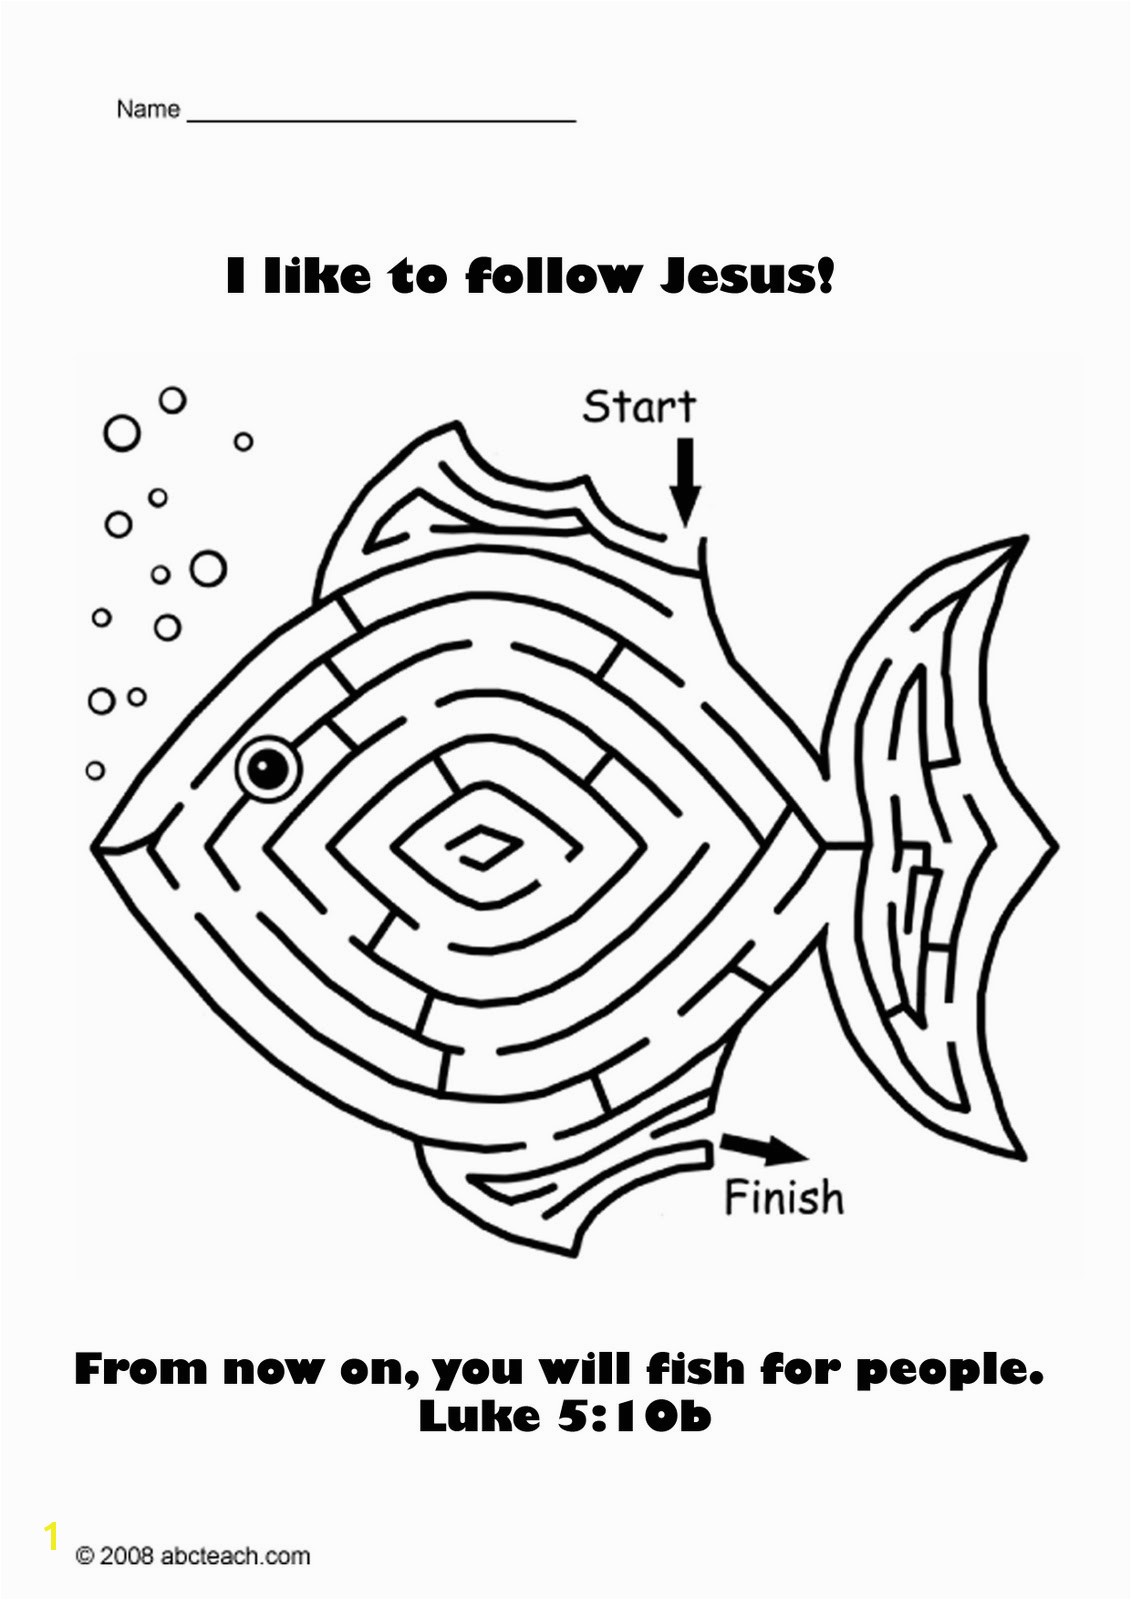 Finished Coloring Pages for Adults Beautiful Cartoon Od Jesus Disciples Coloring Page Free Coloring Pages –